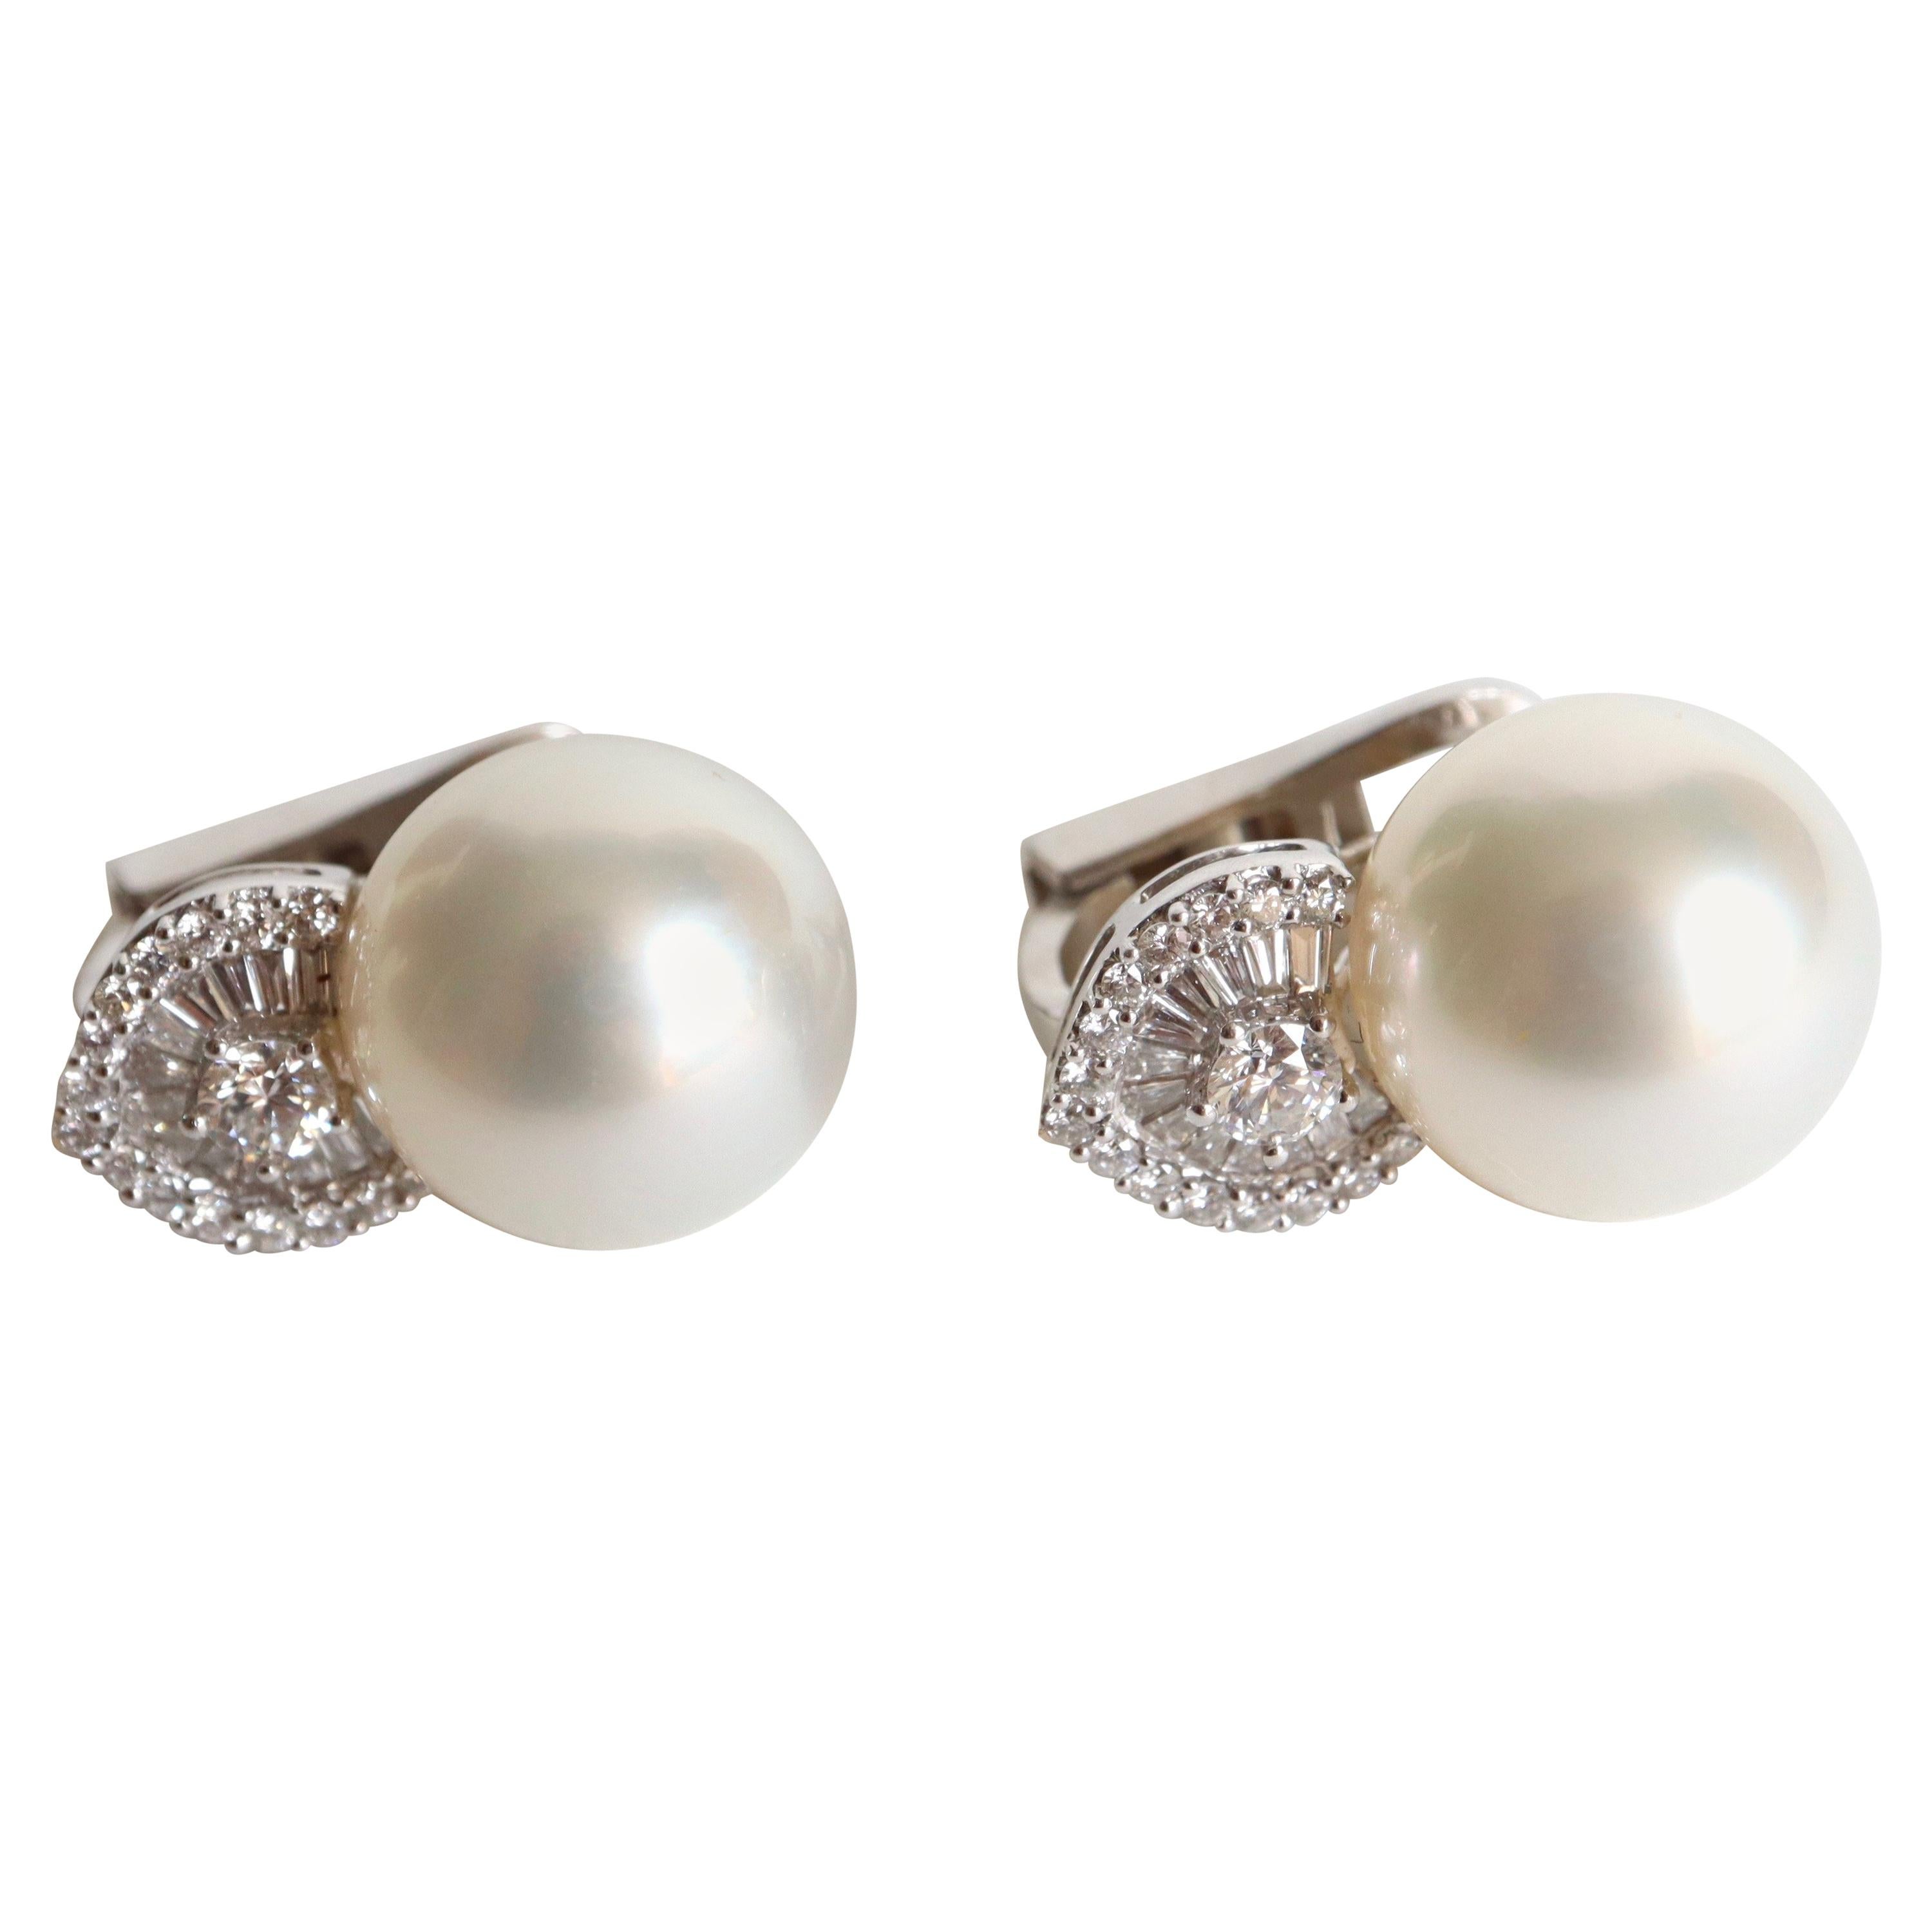 Pearl Clip Earrings 18 Carat White Gold Set with 0.9 Carat of Diamonds